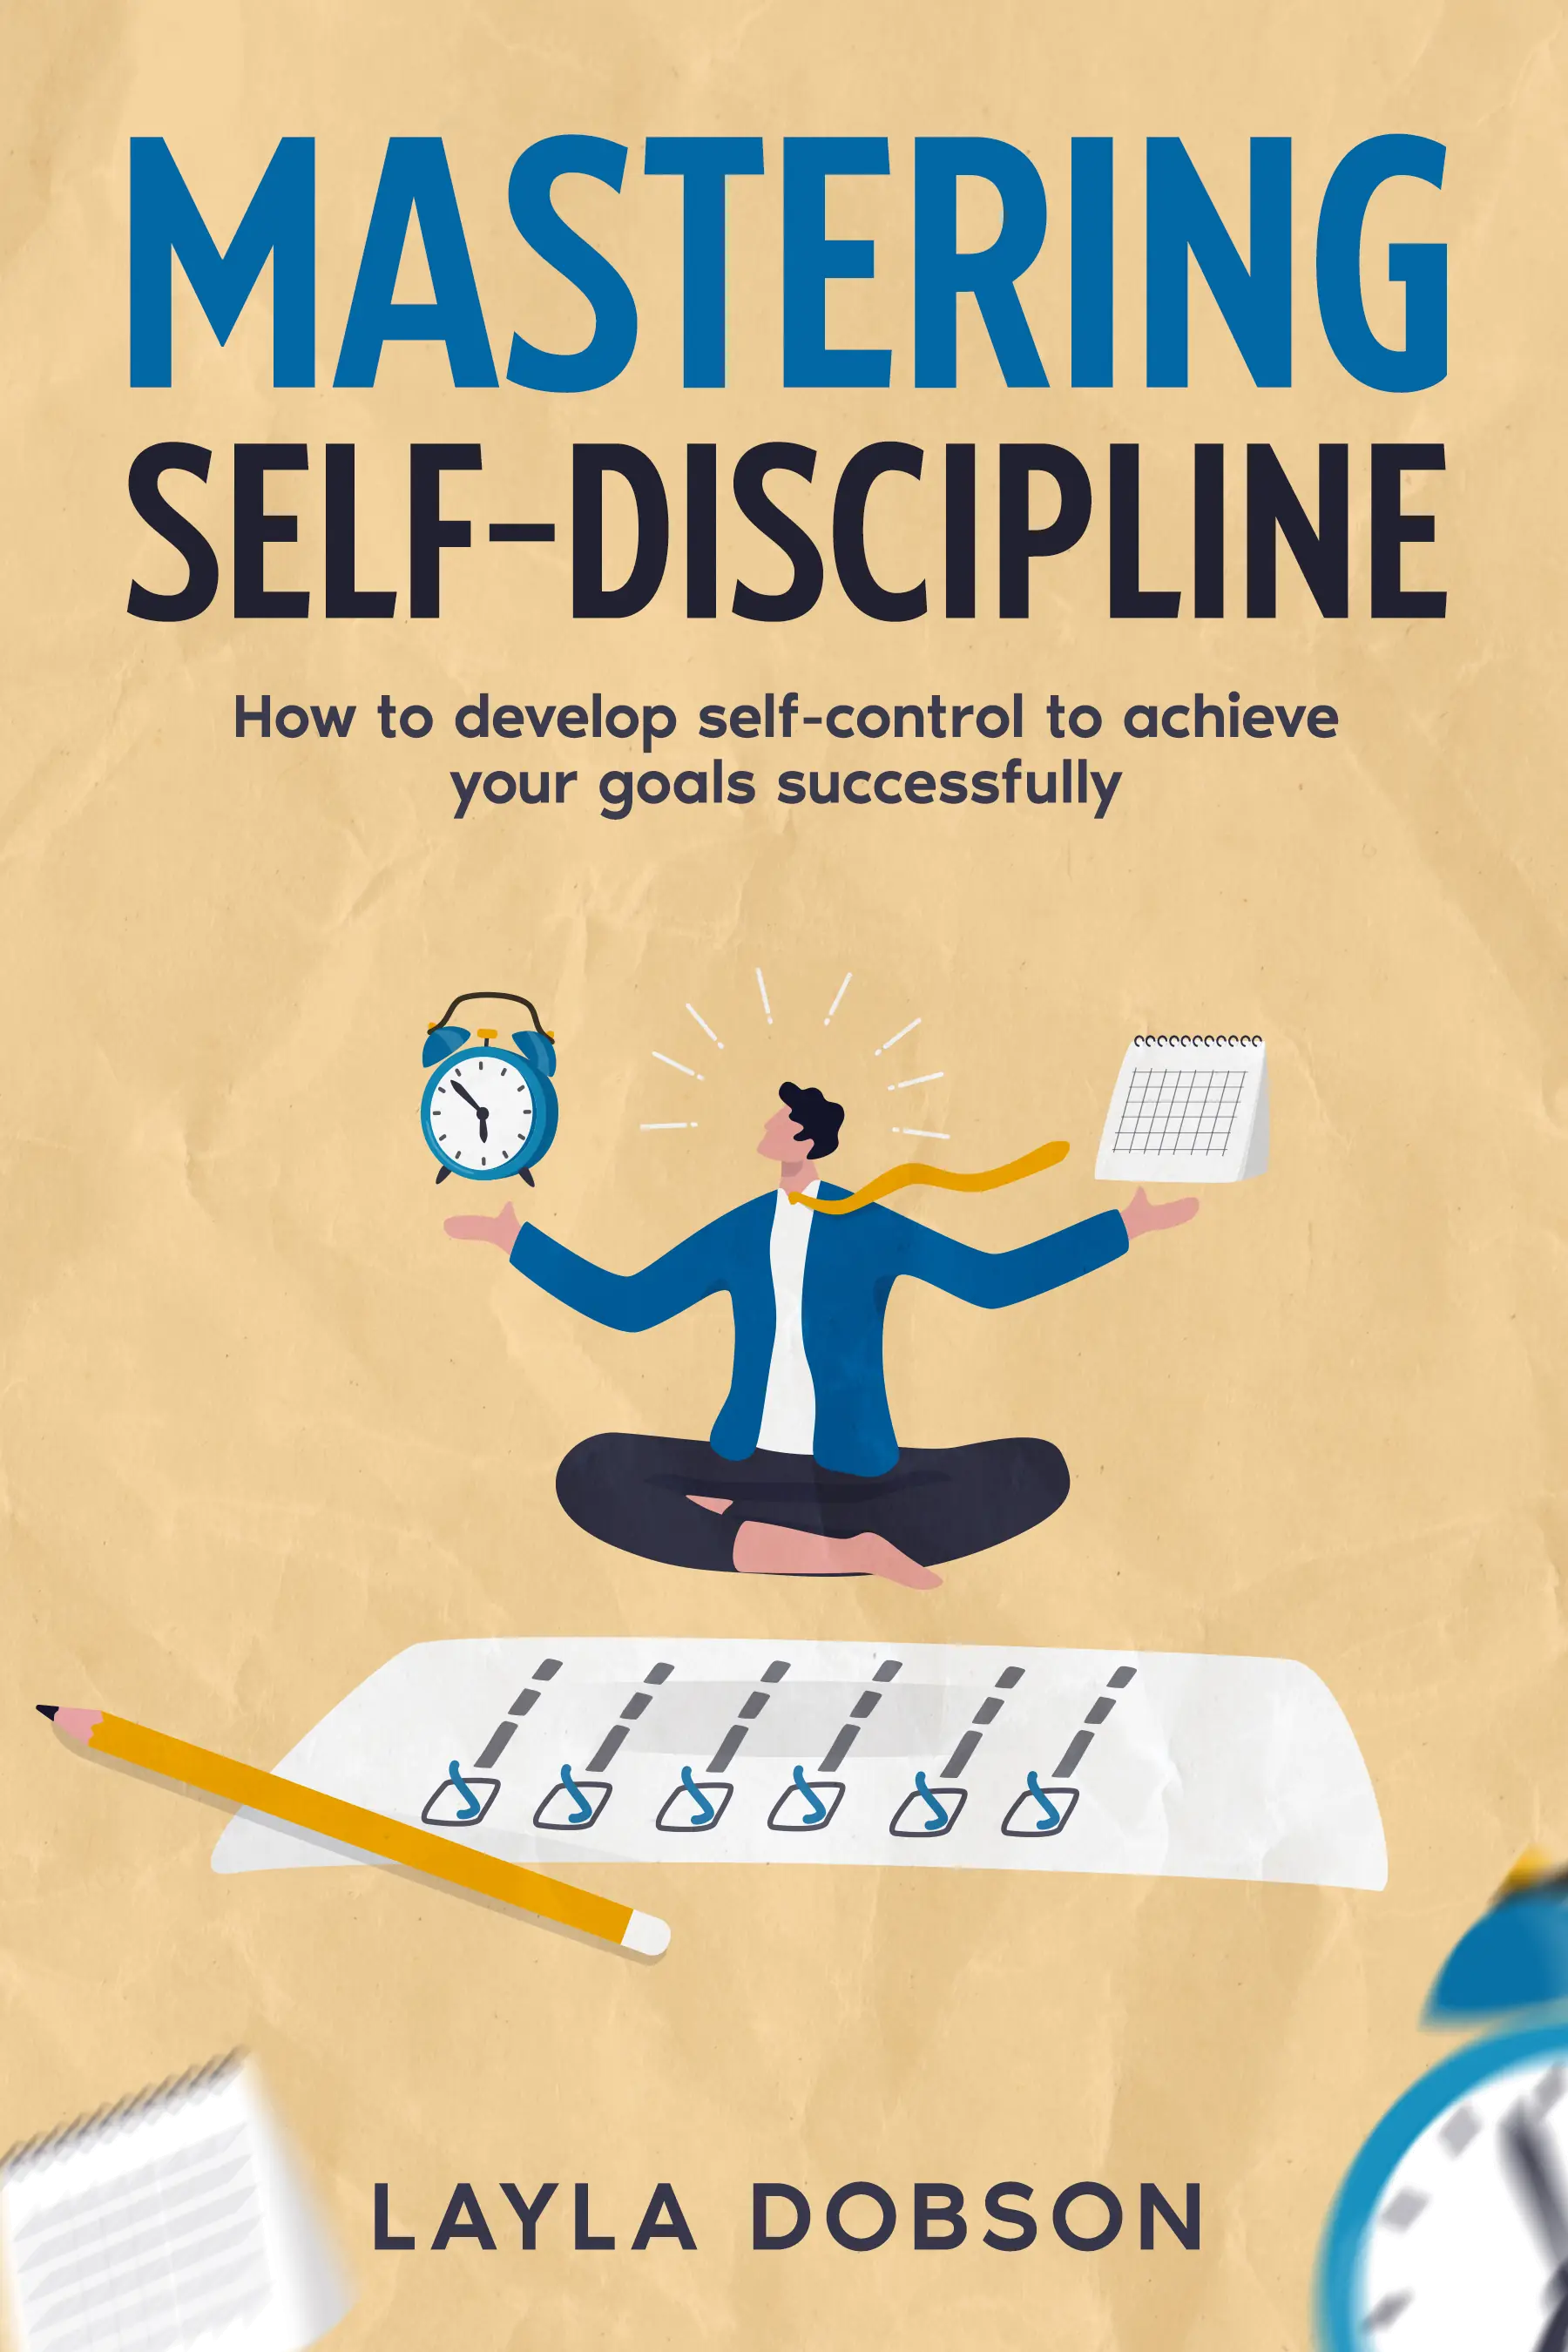 Mastering Self Discipline  by Layla Dobson Audiobook